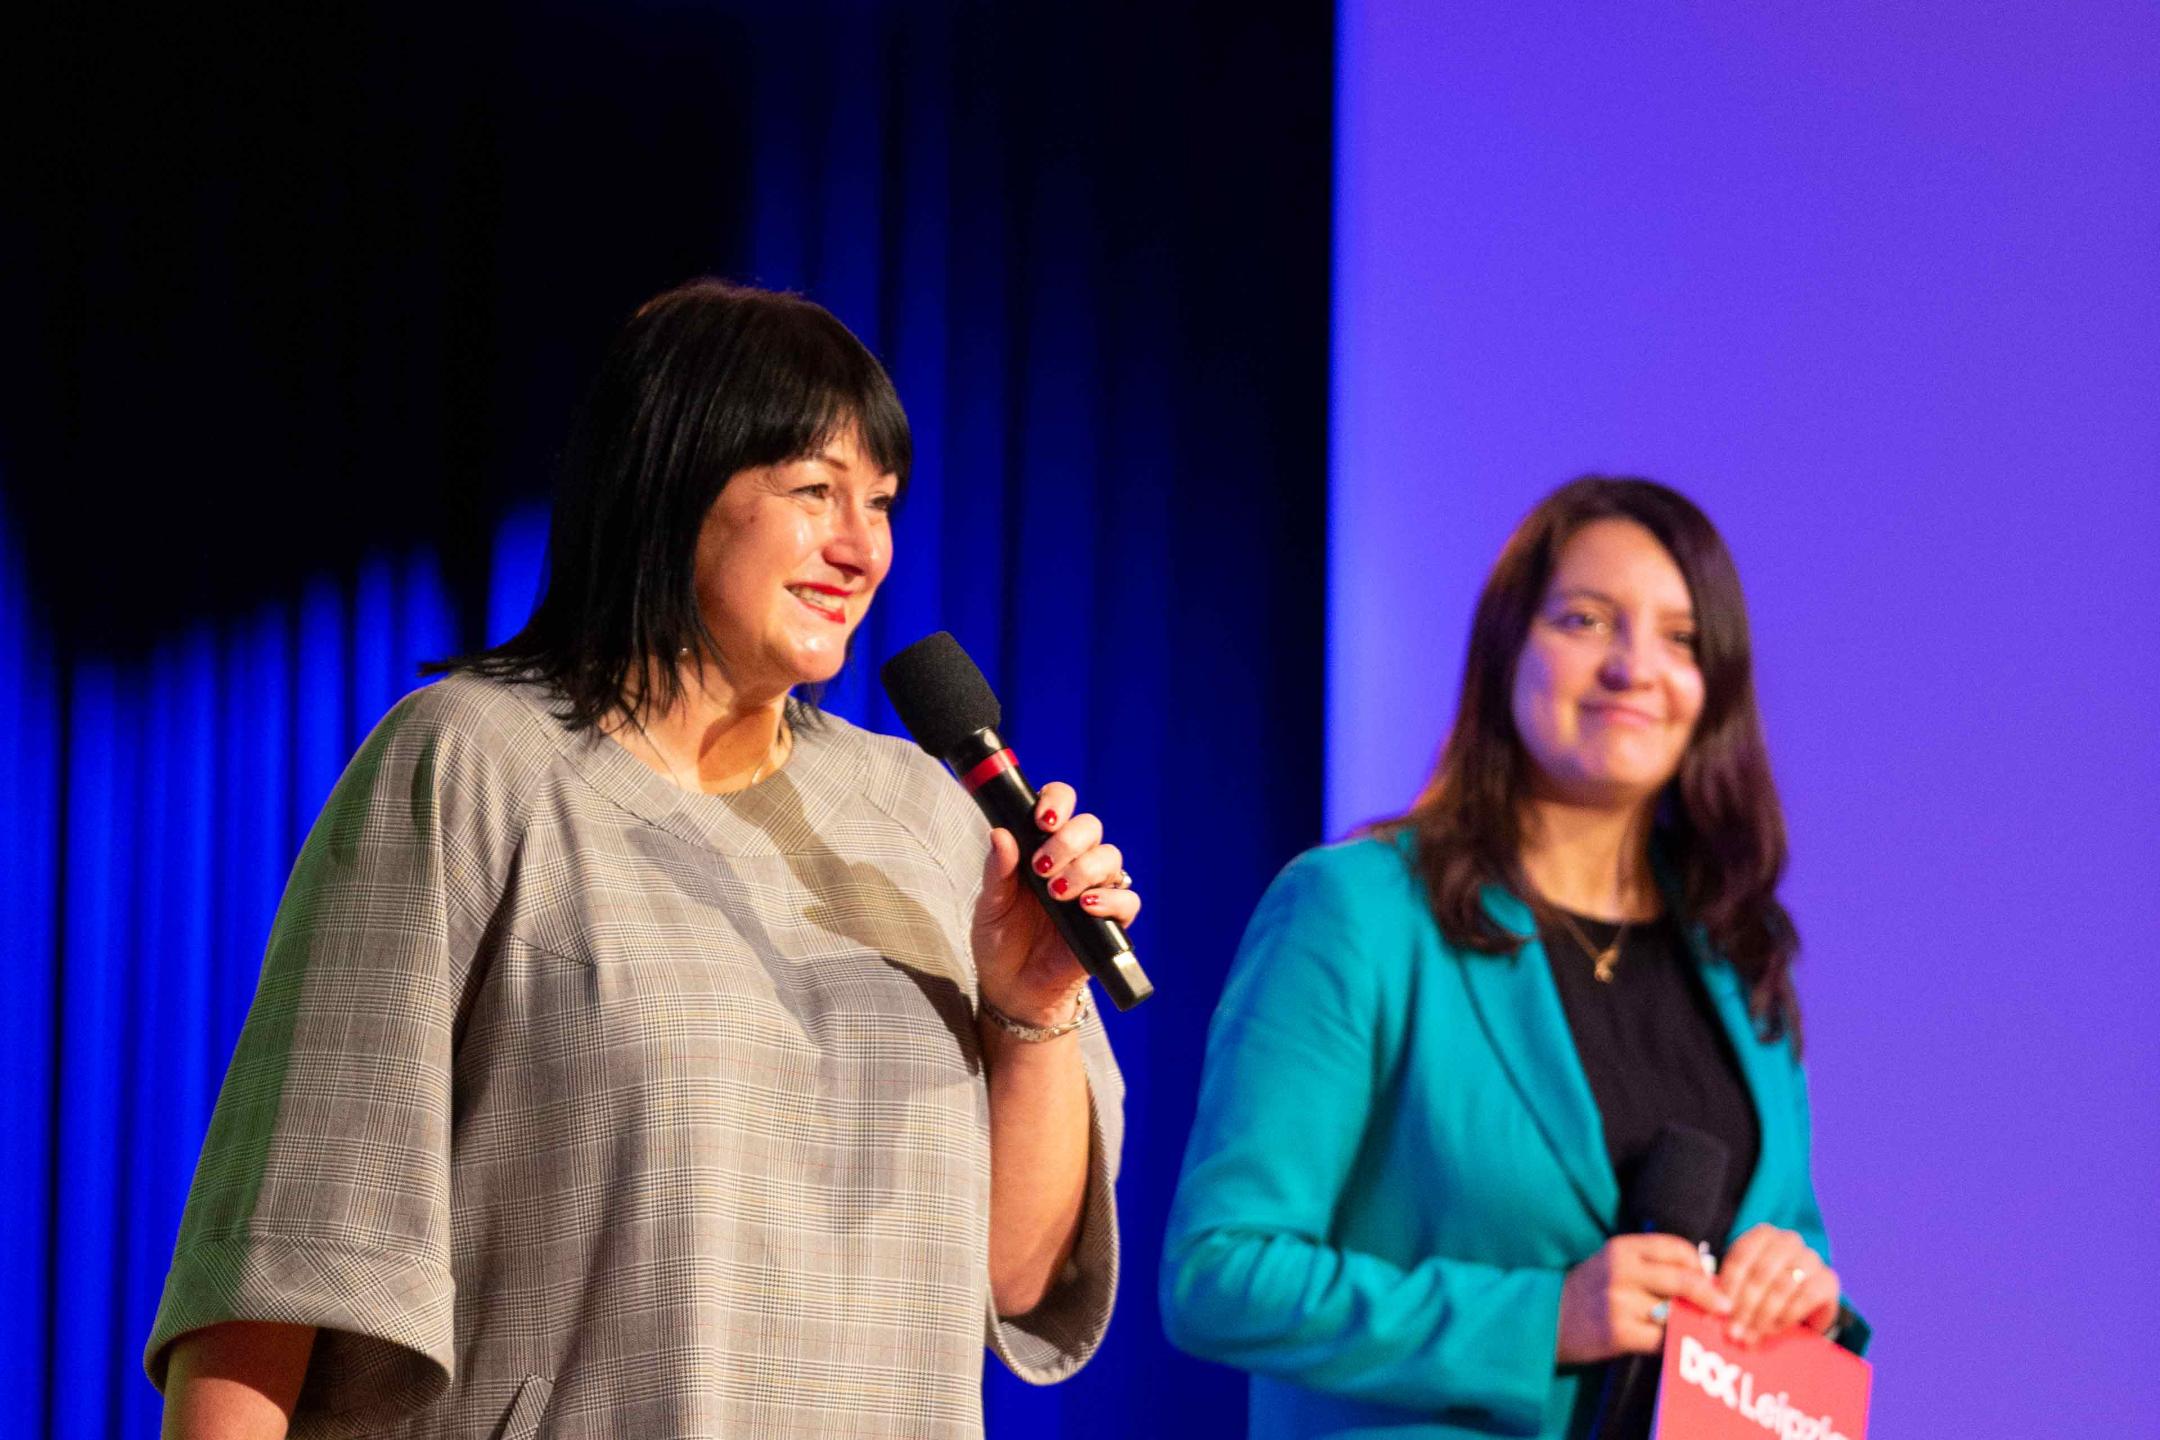 Two women are presenting on a stage with a background in blue. Both are smiling, the woman at the left is holding a microphone.